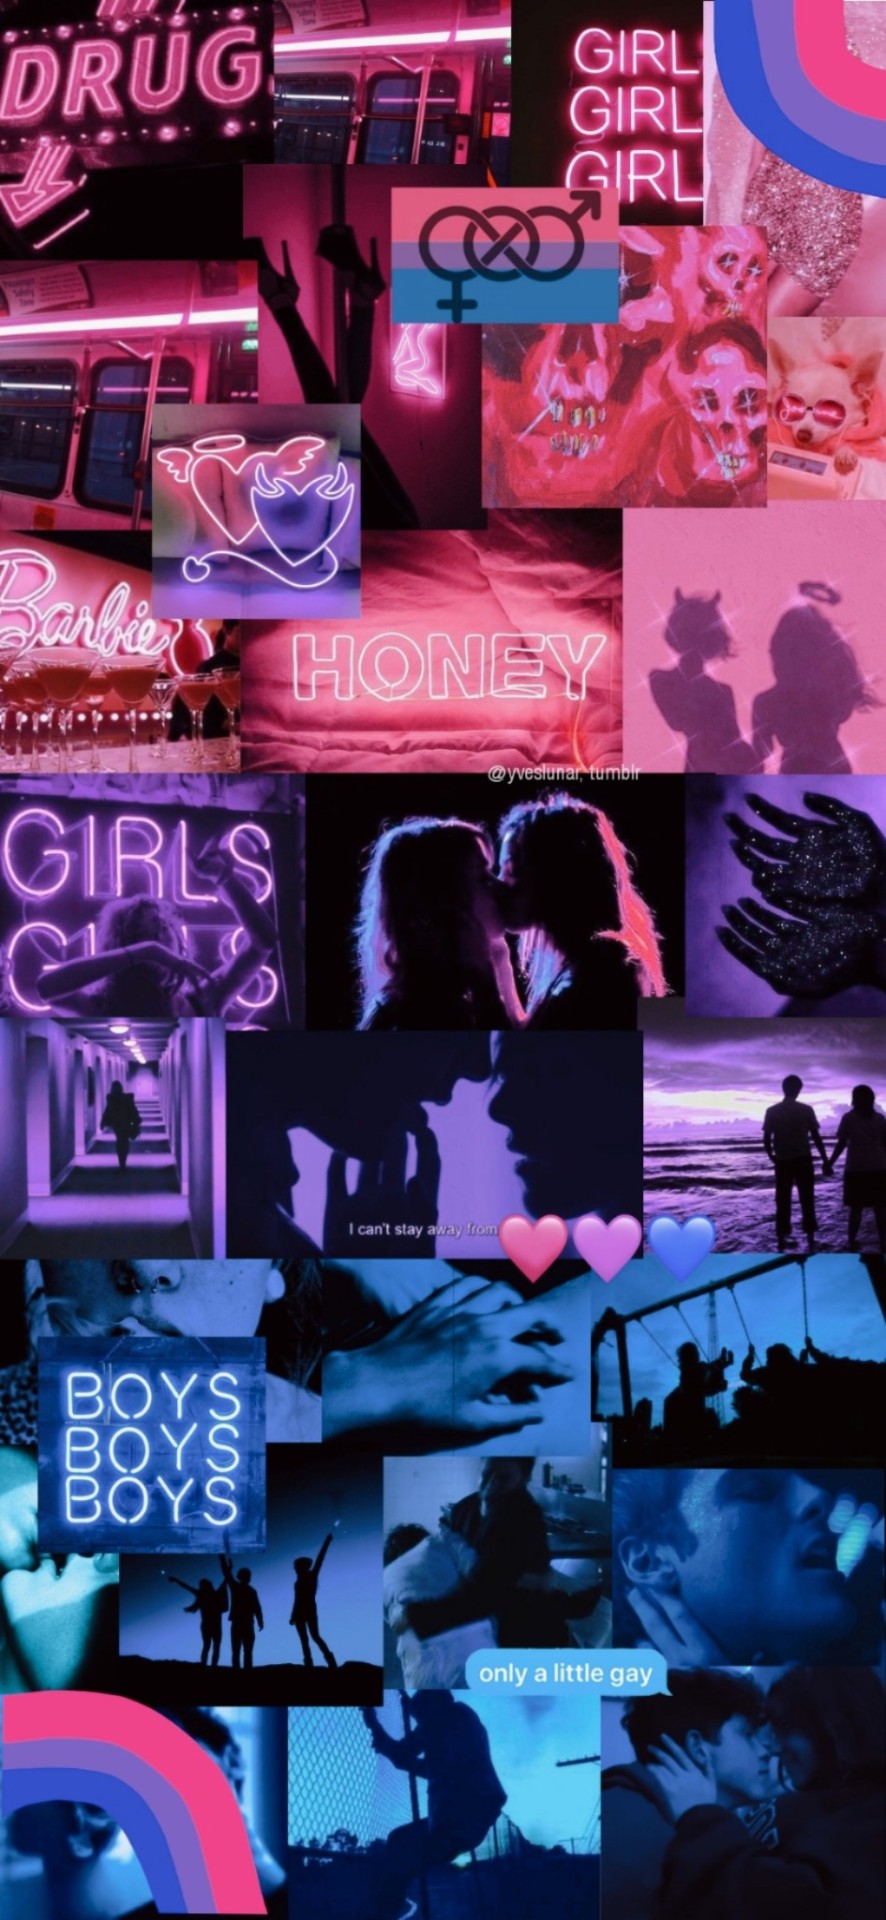 Aesthetic wallpaper for phone with pink and blue neon lights - Bisexual